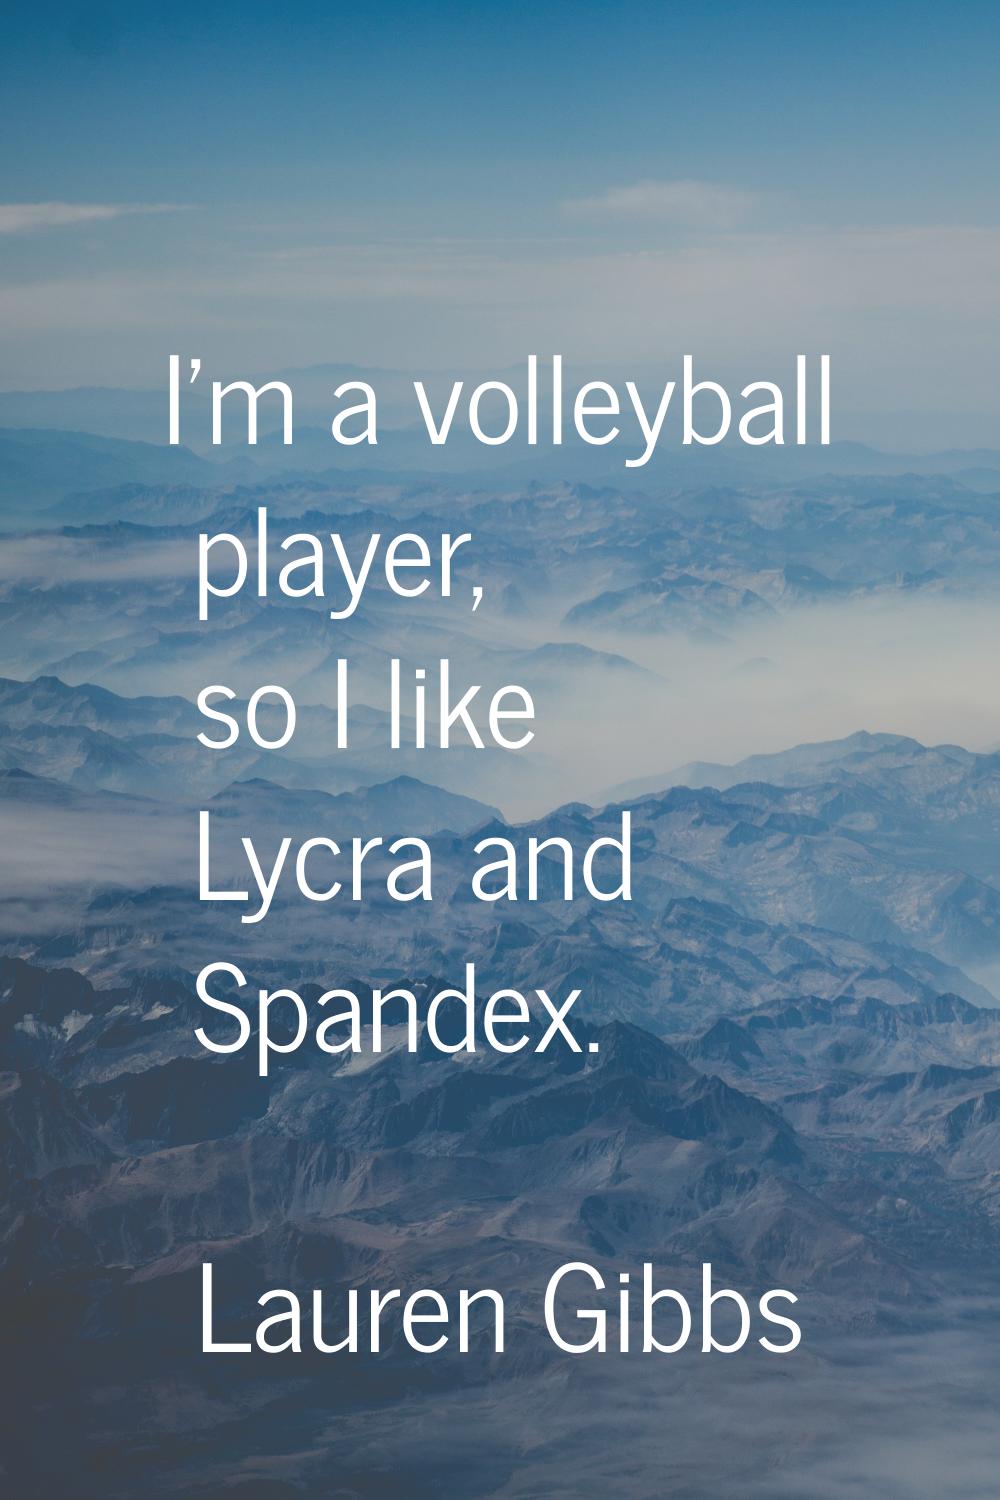 I'm a volleyball player, so I like Lycra and Spandex.